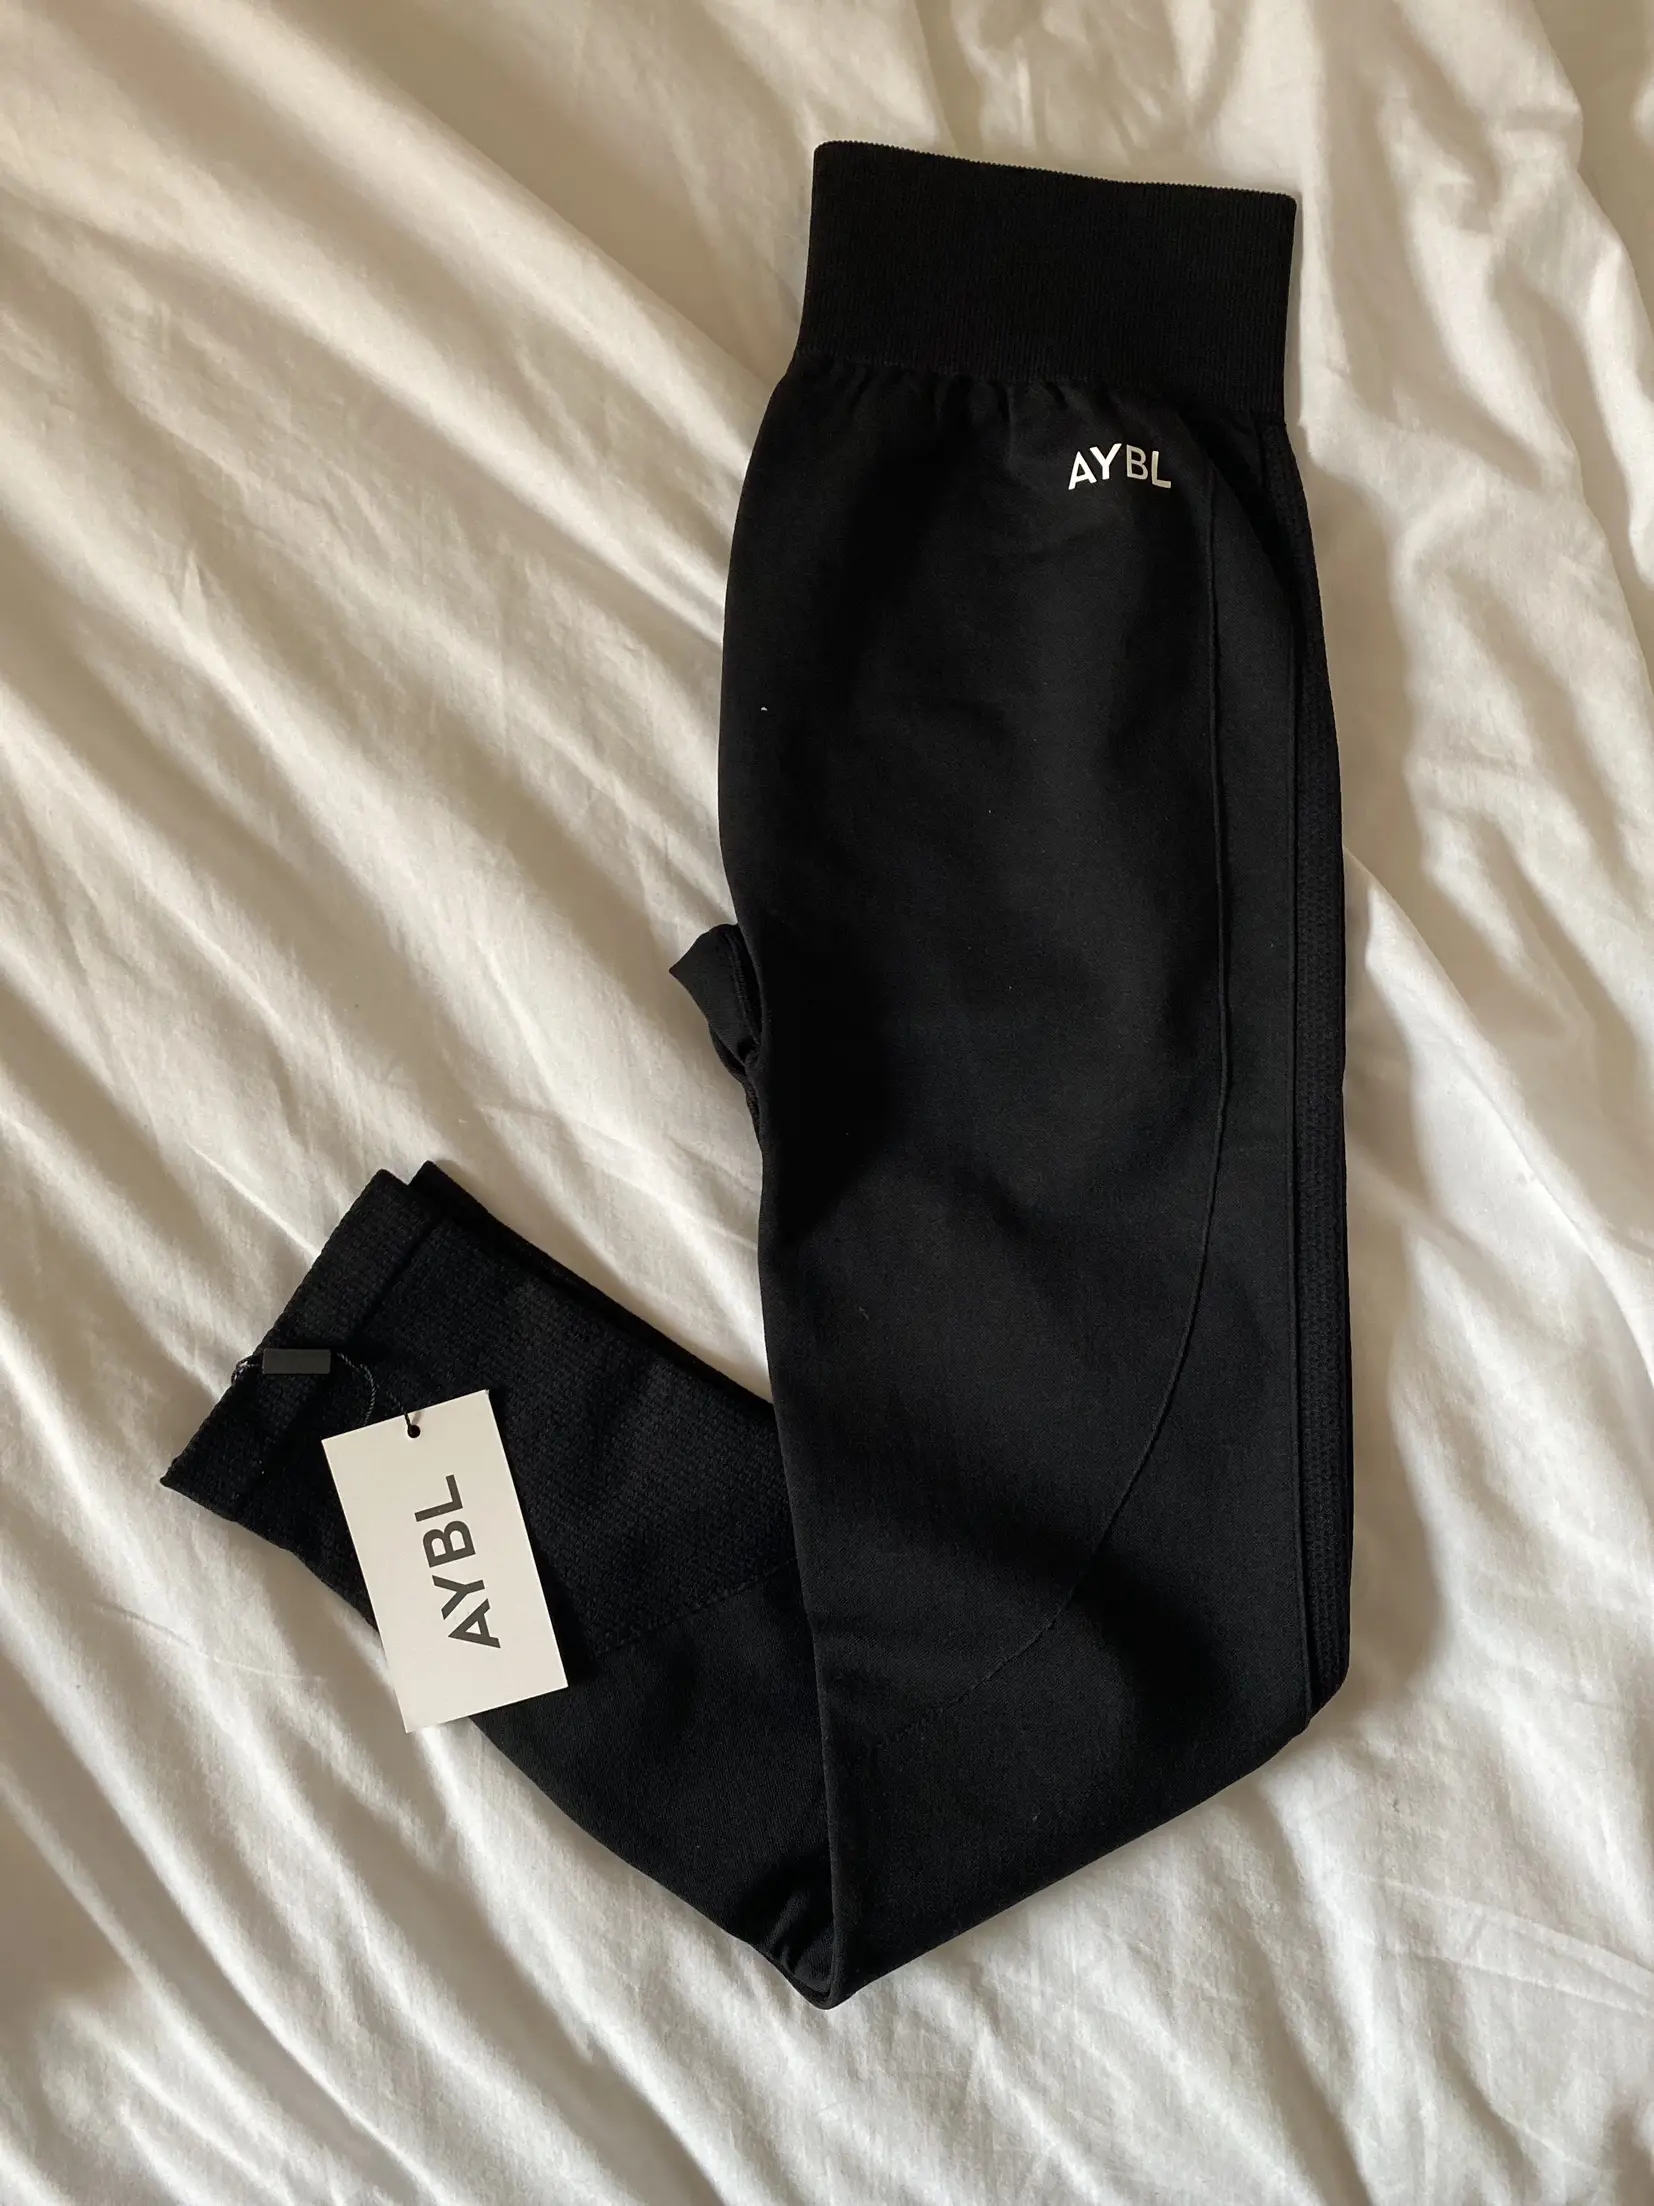 AYBL V2 SEAMLESS SETS TRY-ON + REVIEW